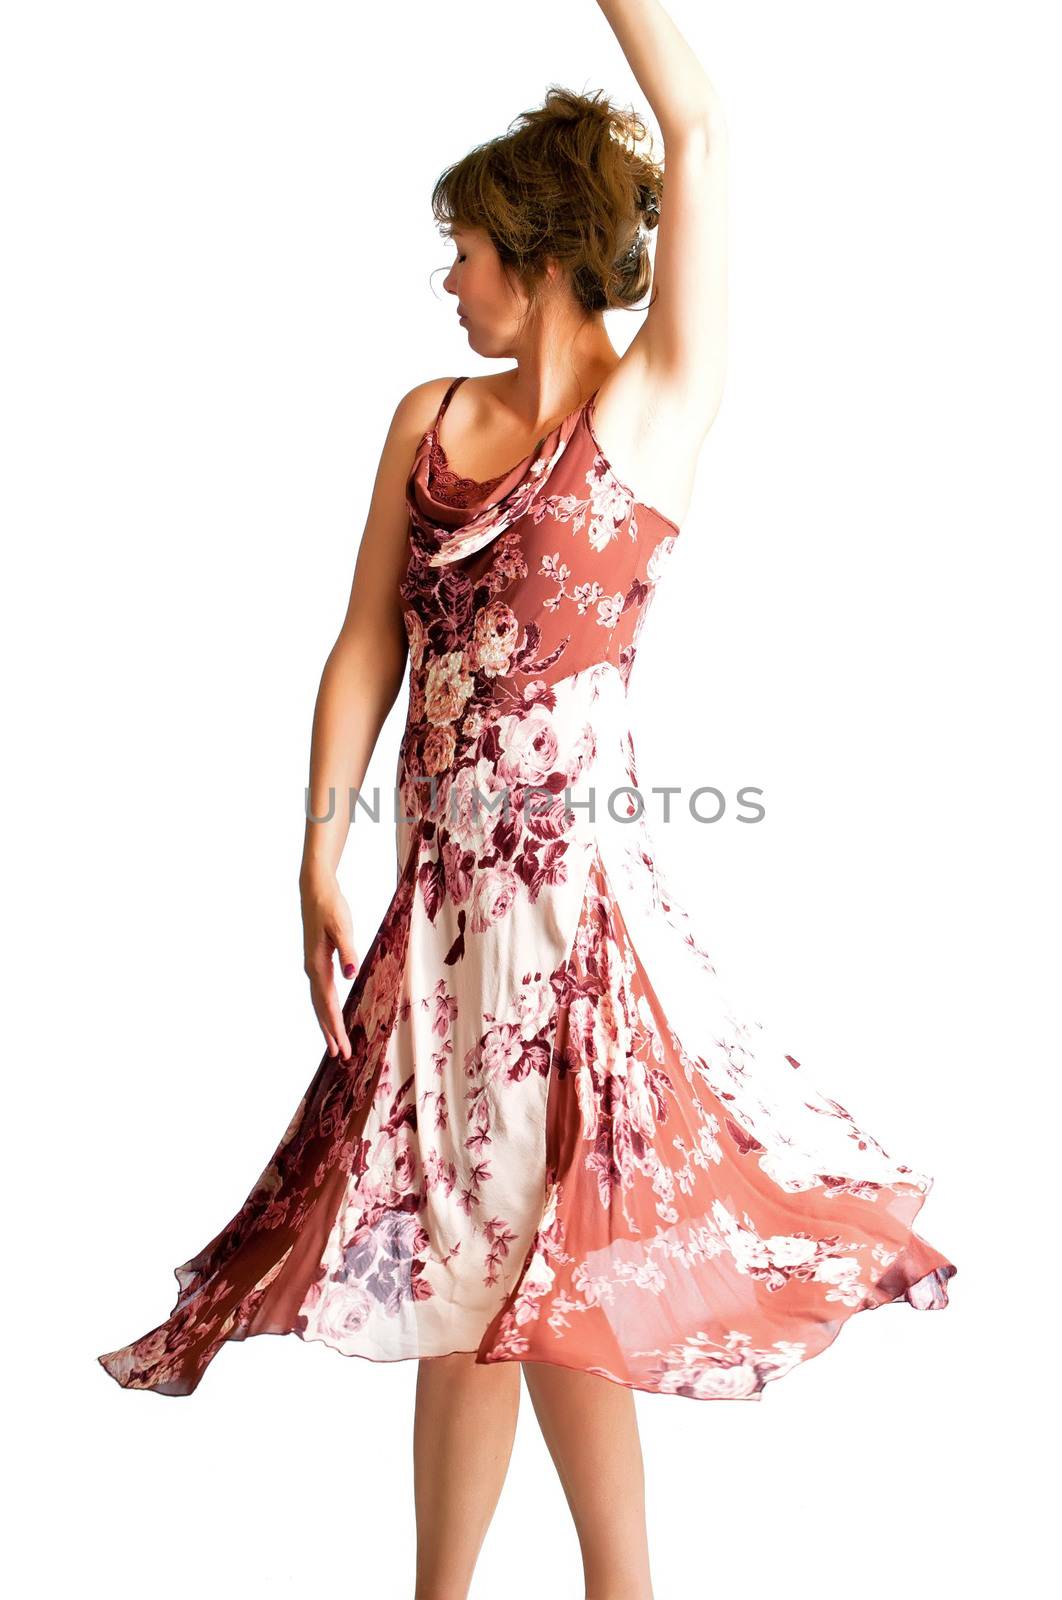 Pretty woman twirling with a full dress flared at the hem from the dance motion.